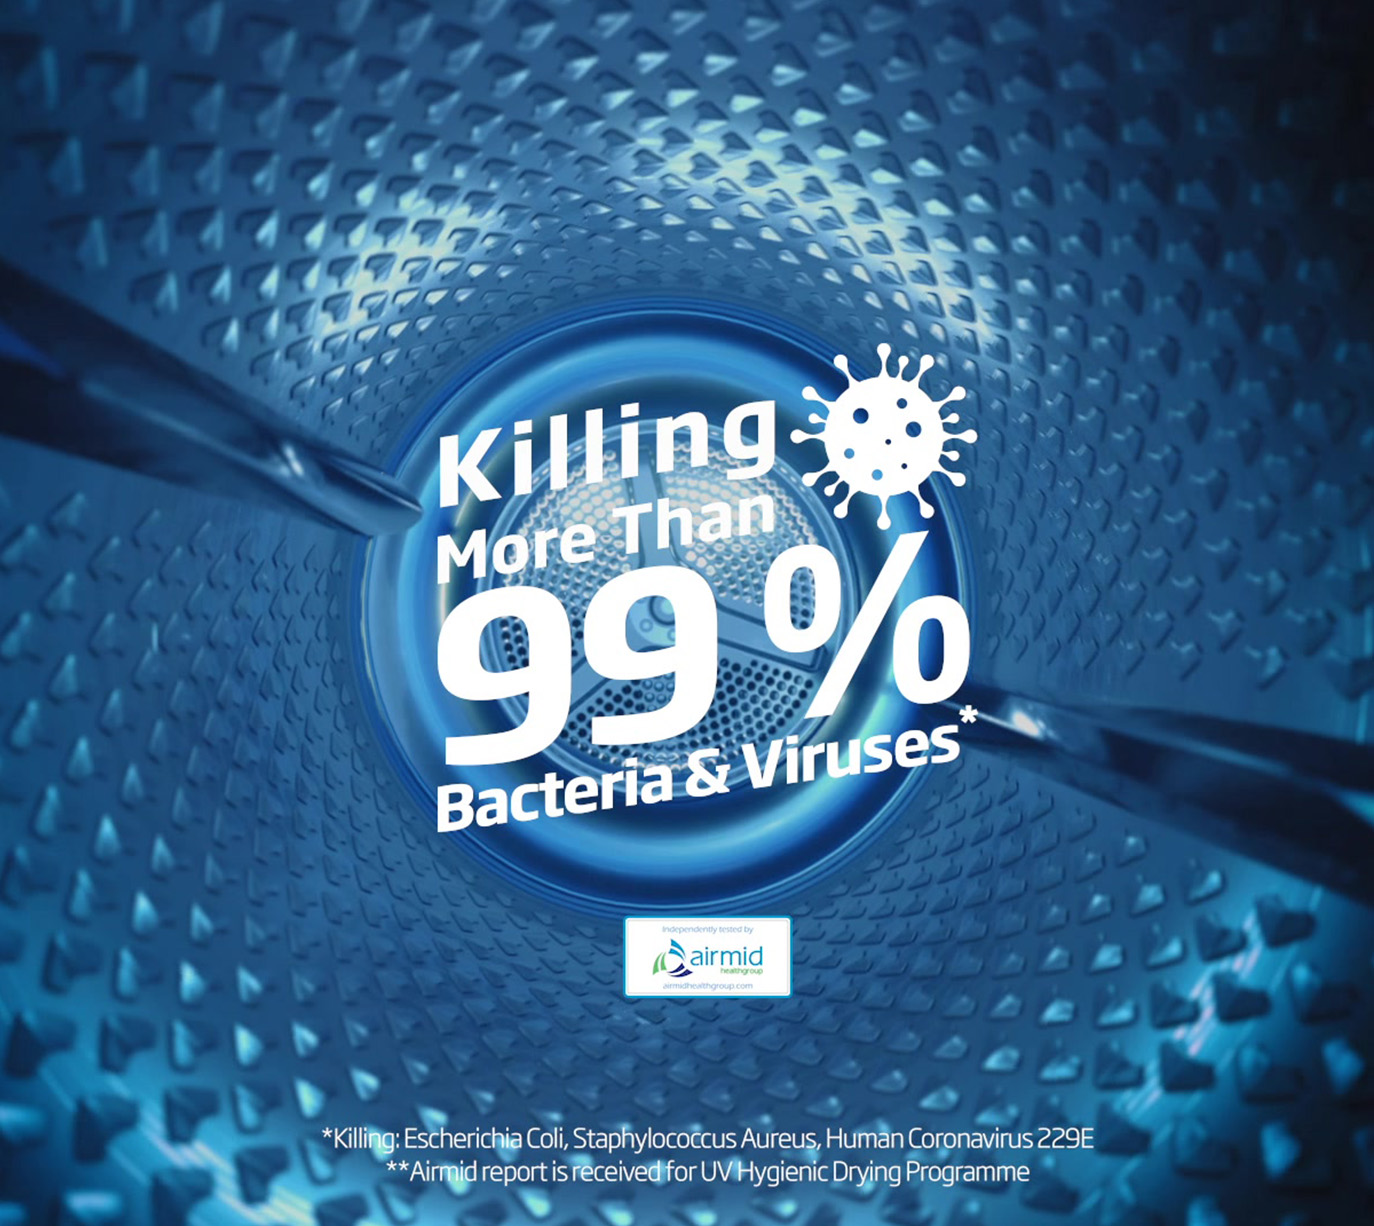 UV HygienicDrying- Kills more than 99% of bacteria and viruses